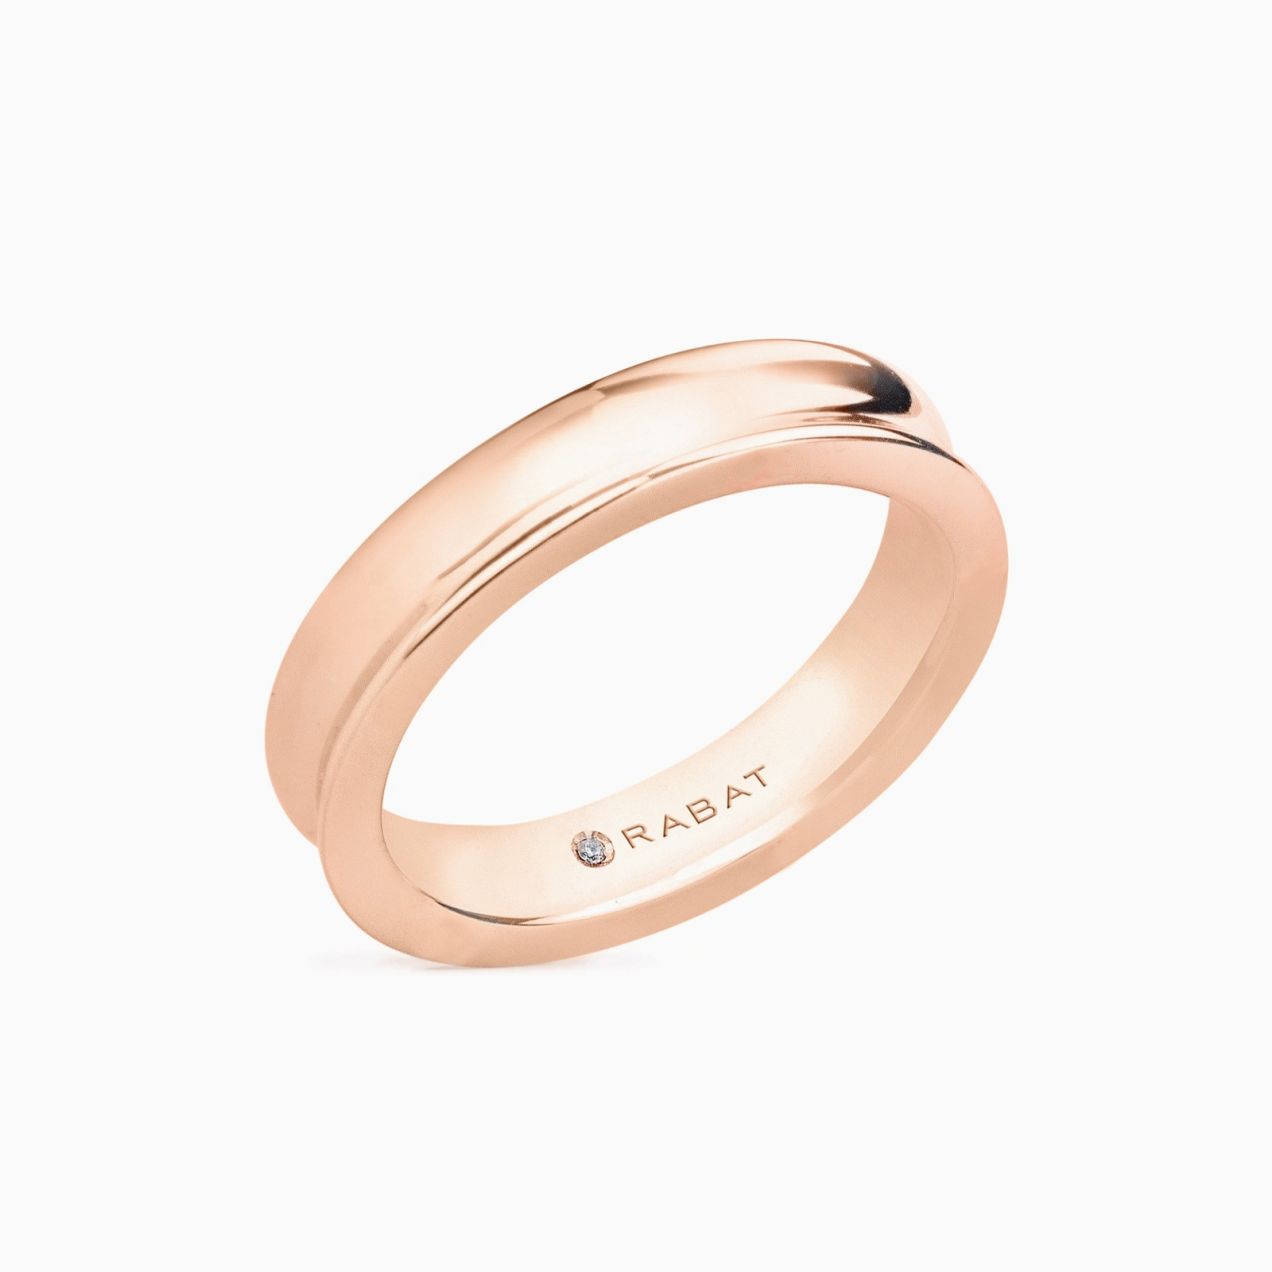 London wedding band in gold